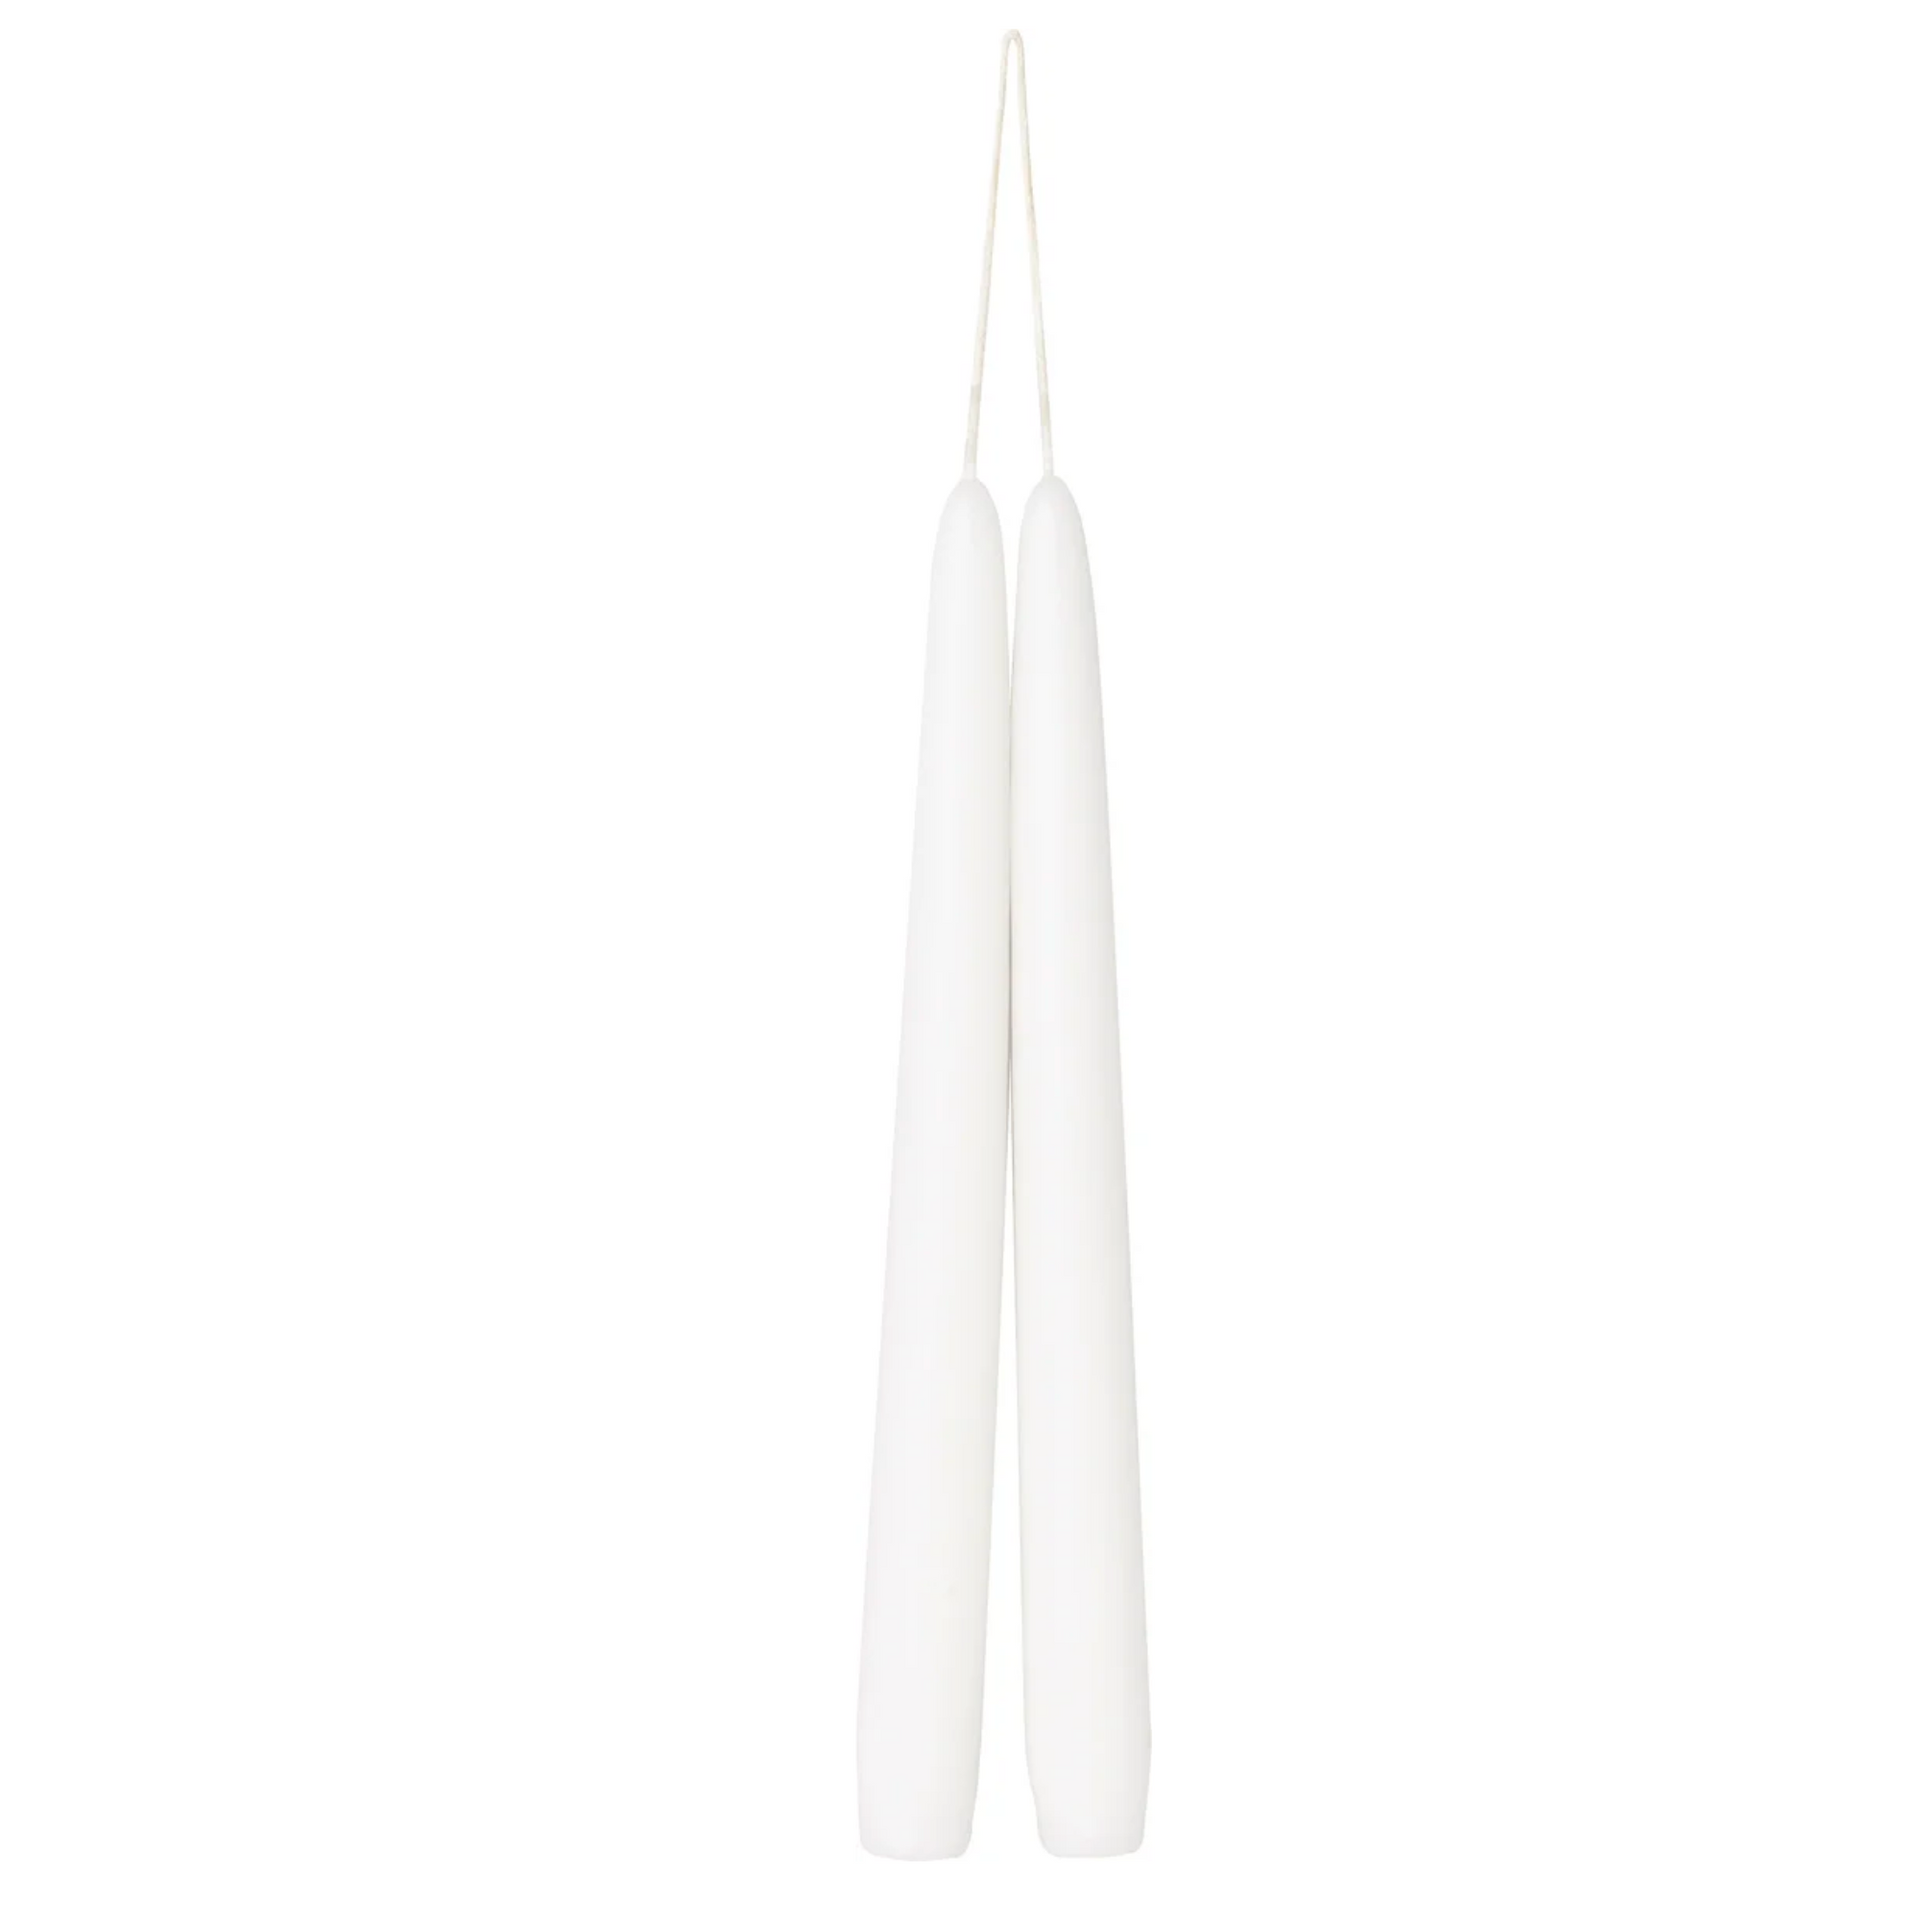 White Unscented Taper Candle + Reviews